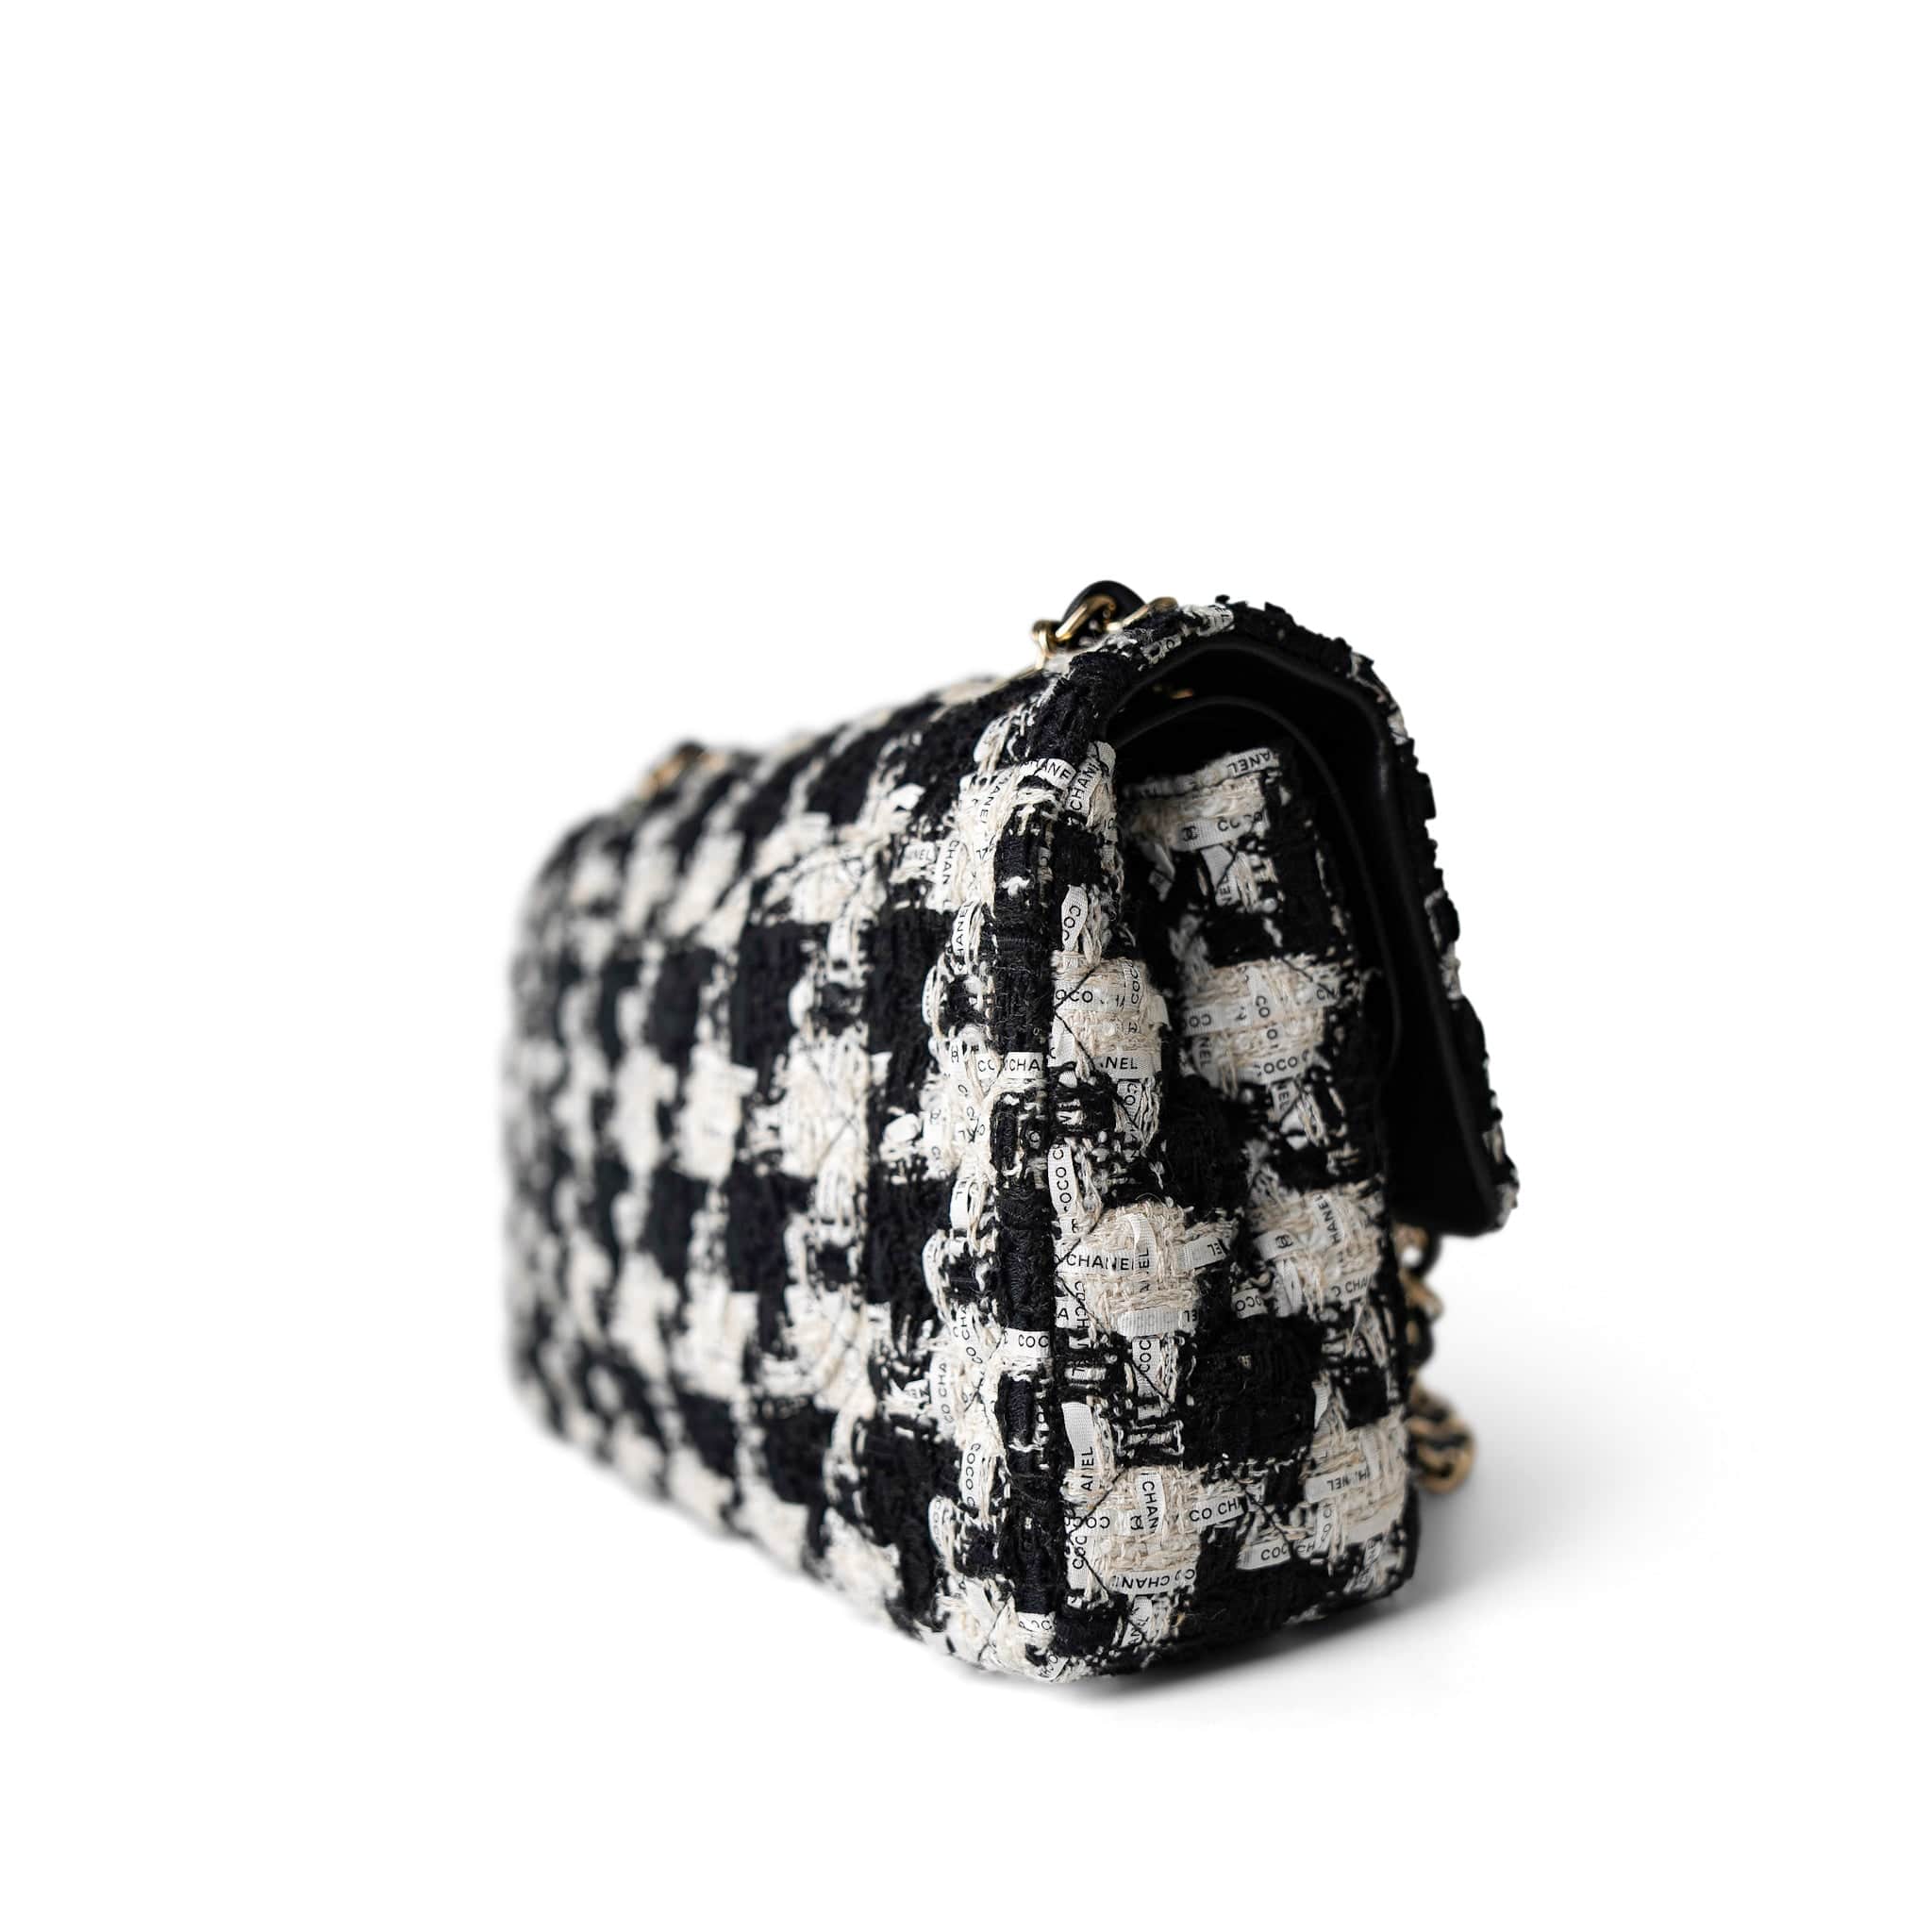 CHANEL Handbag Multicolor 20s Black White Houndstooth Tweed Quilted Classic Flap Medium Light Gold Hardware - Redeluxe